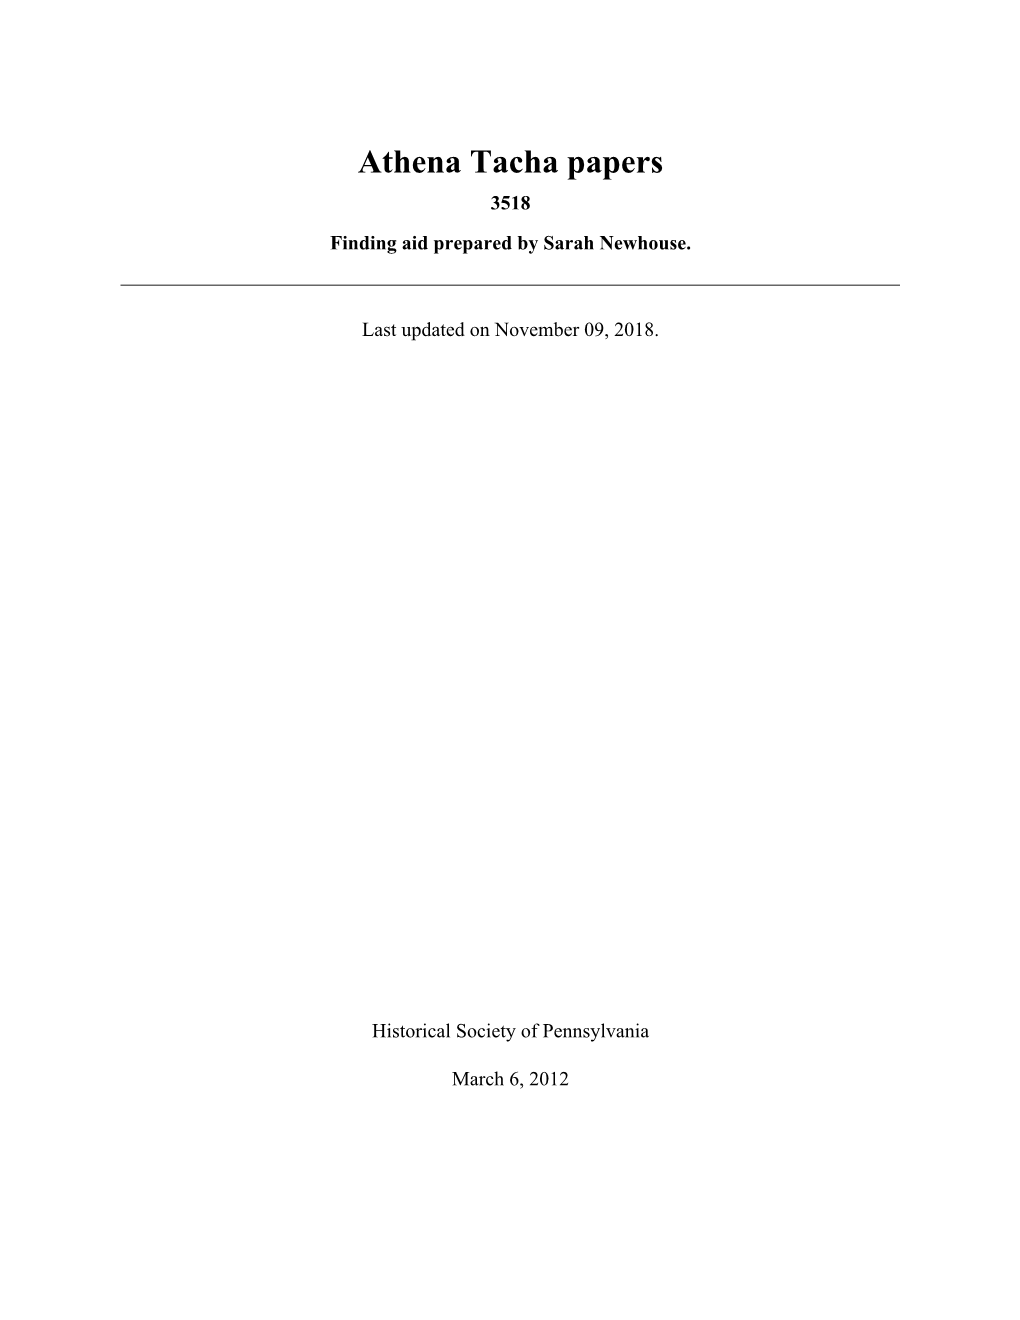 Athena Tacha Papers 3518 Finding Aid Prepared by Sarah Newhouse